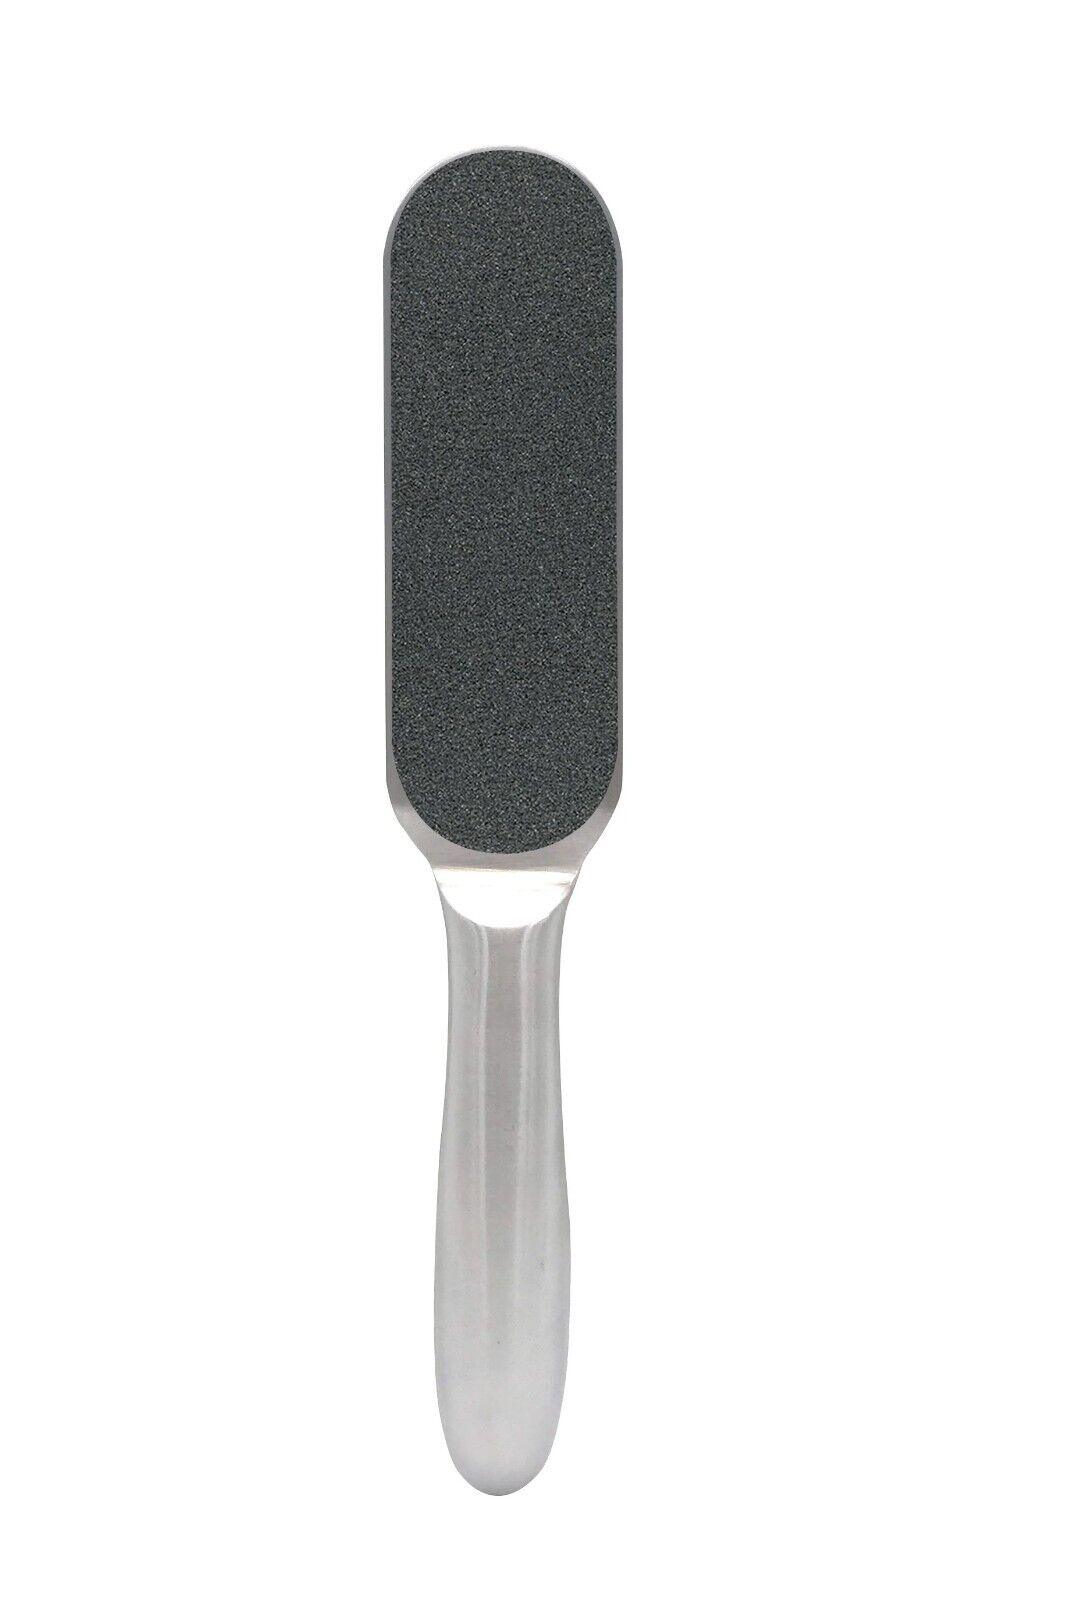 Sunny Stainless Steel Deluxe Metal Foot file with Sand Paper